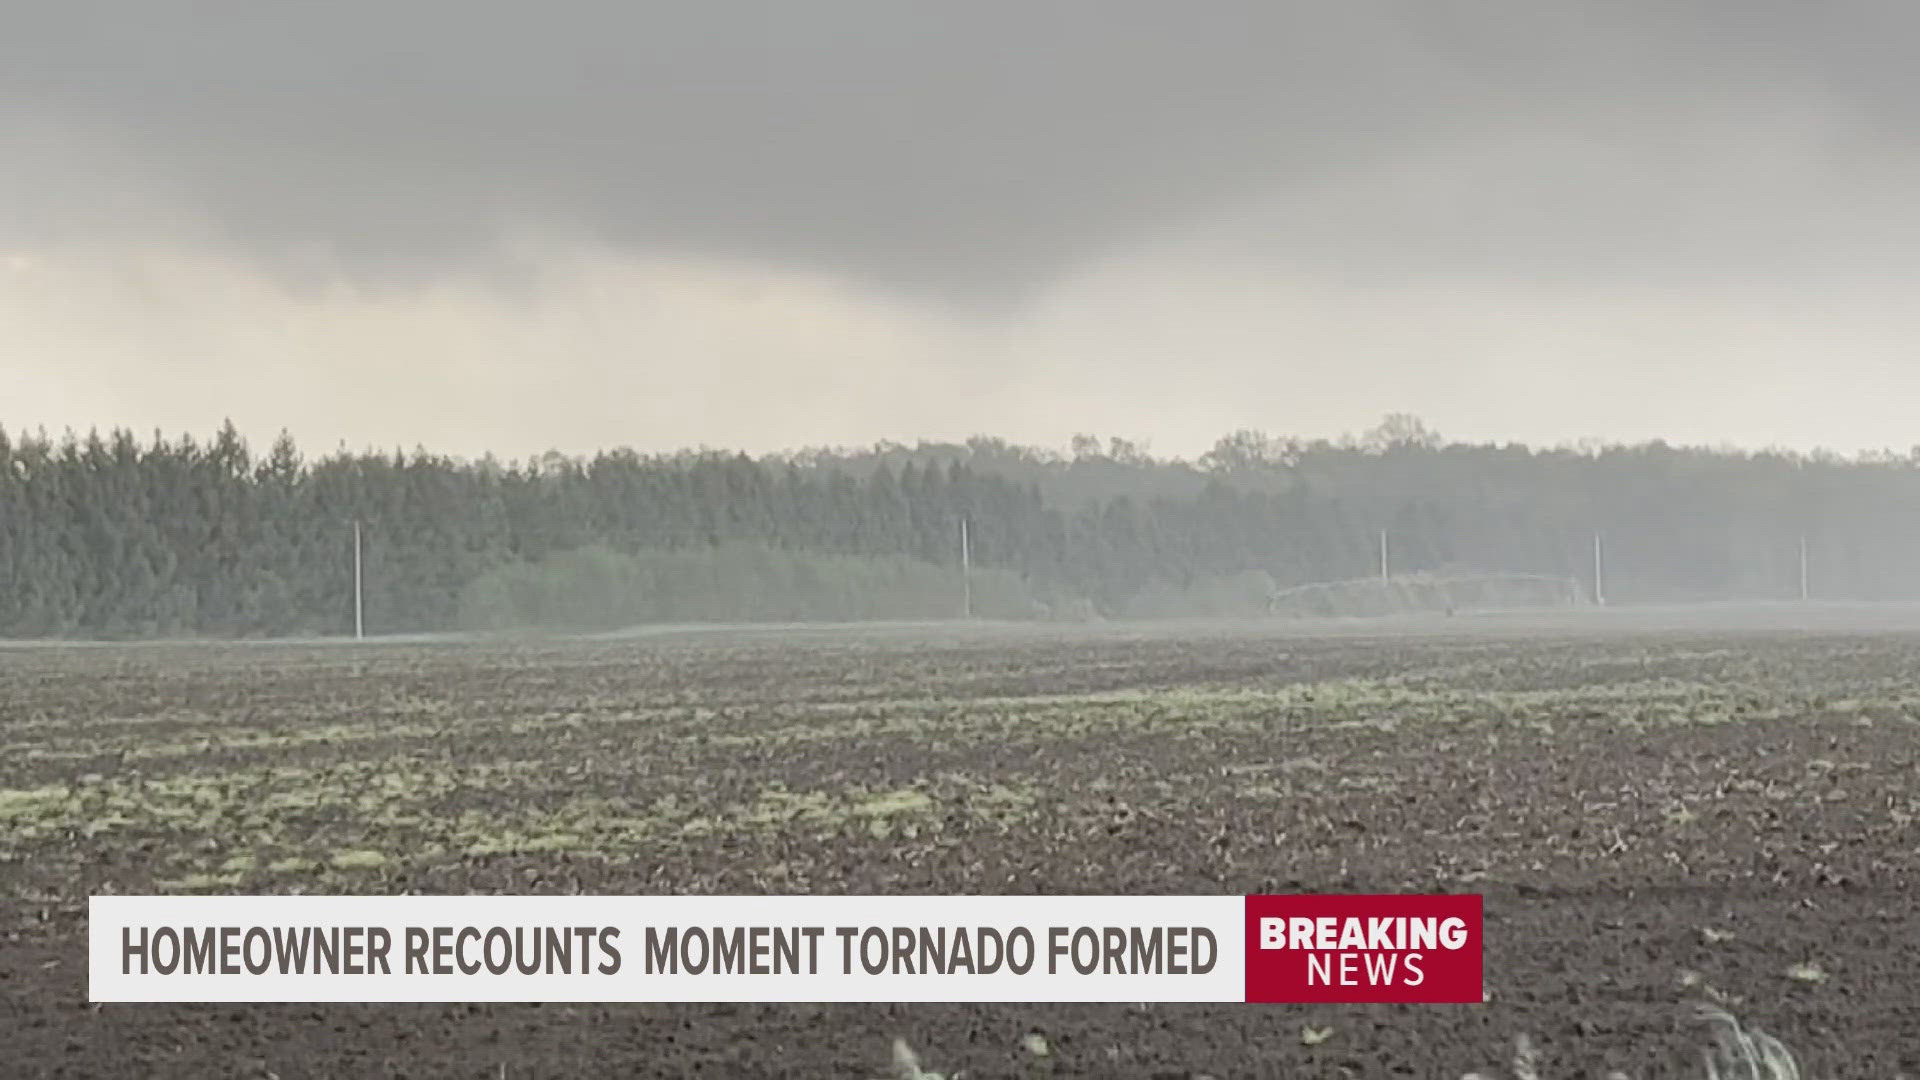 Chase Royer lives North of Colon and saw one of the tornadoes form on Tuesday.